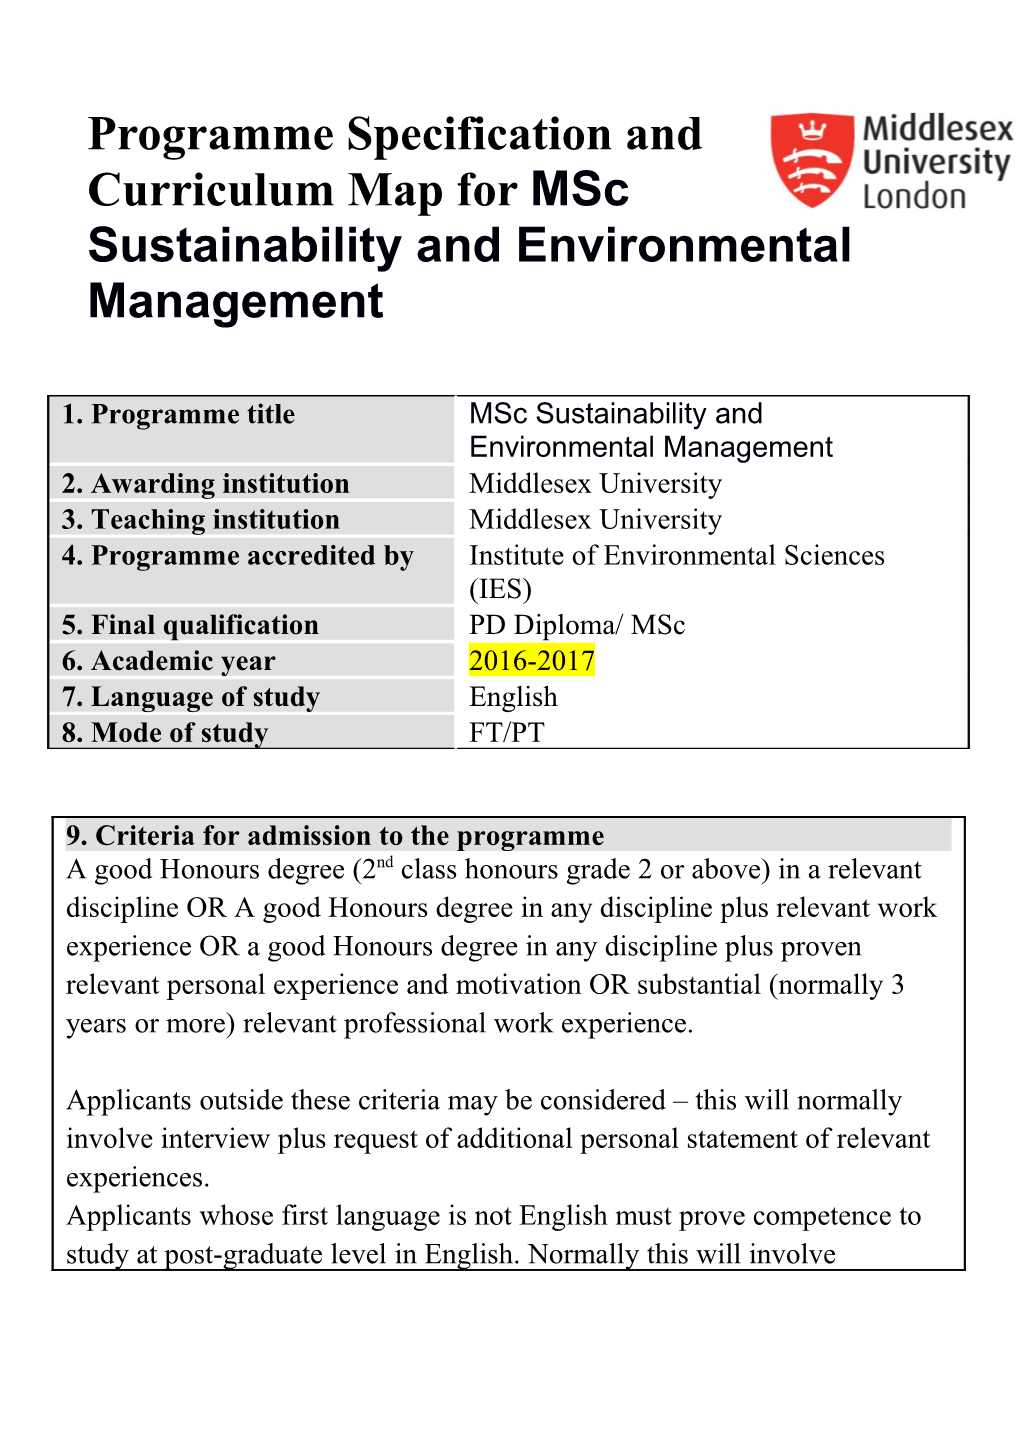 Programme Specification and Curriculum Map for Msc Sustainability and Environmental Management